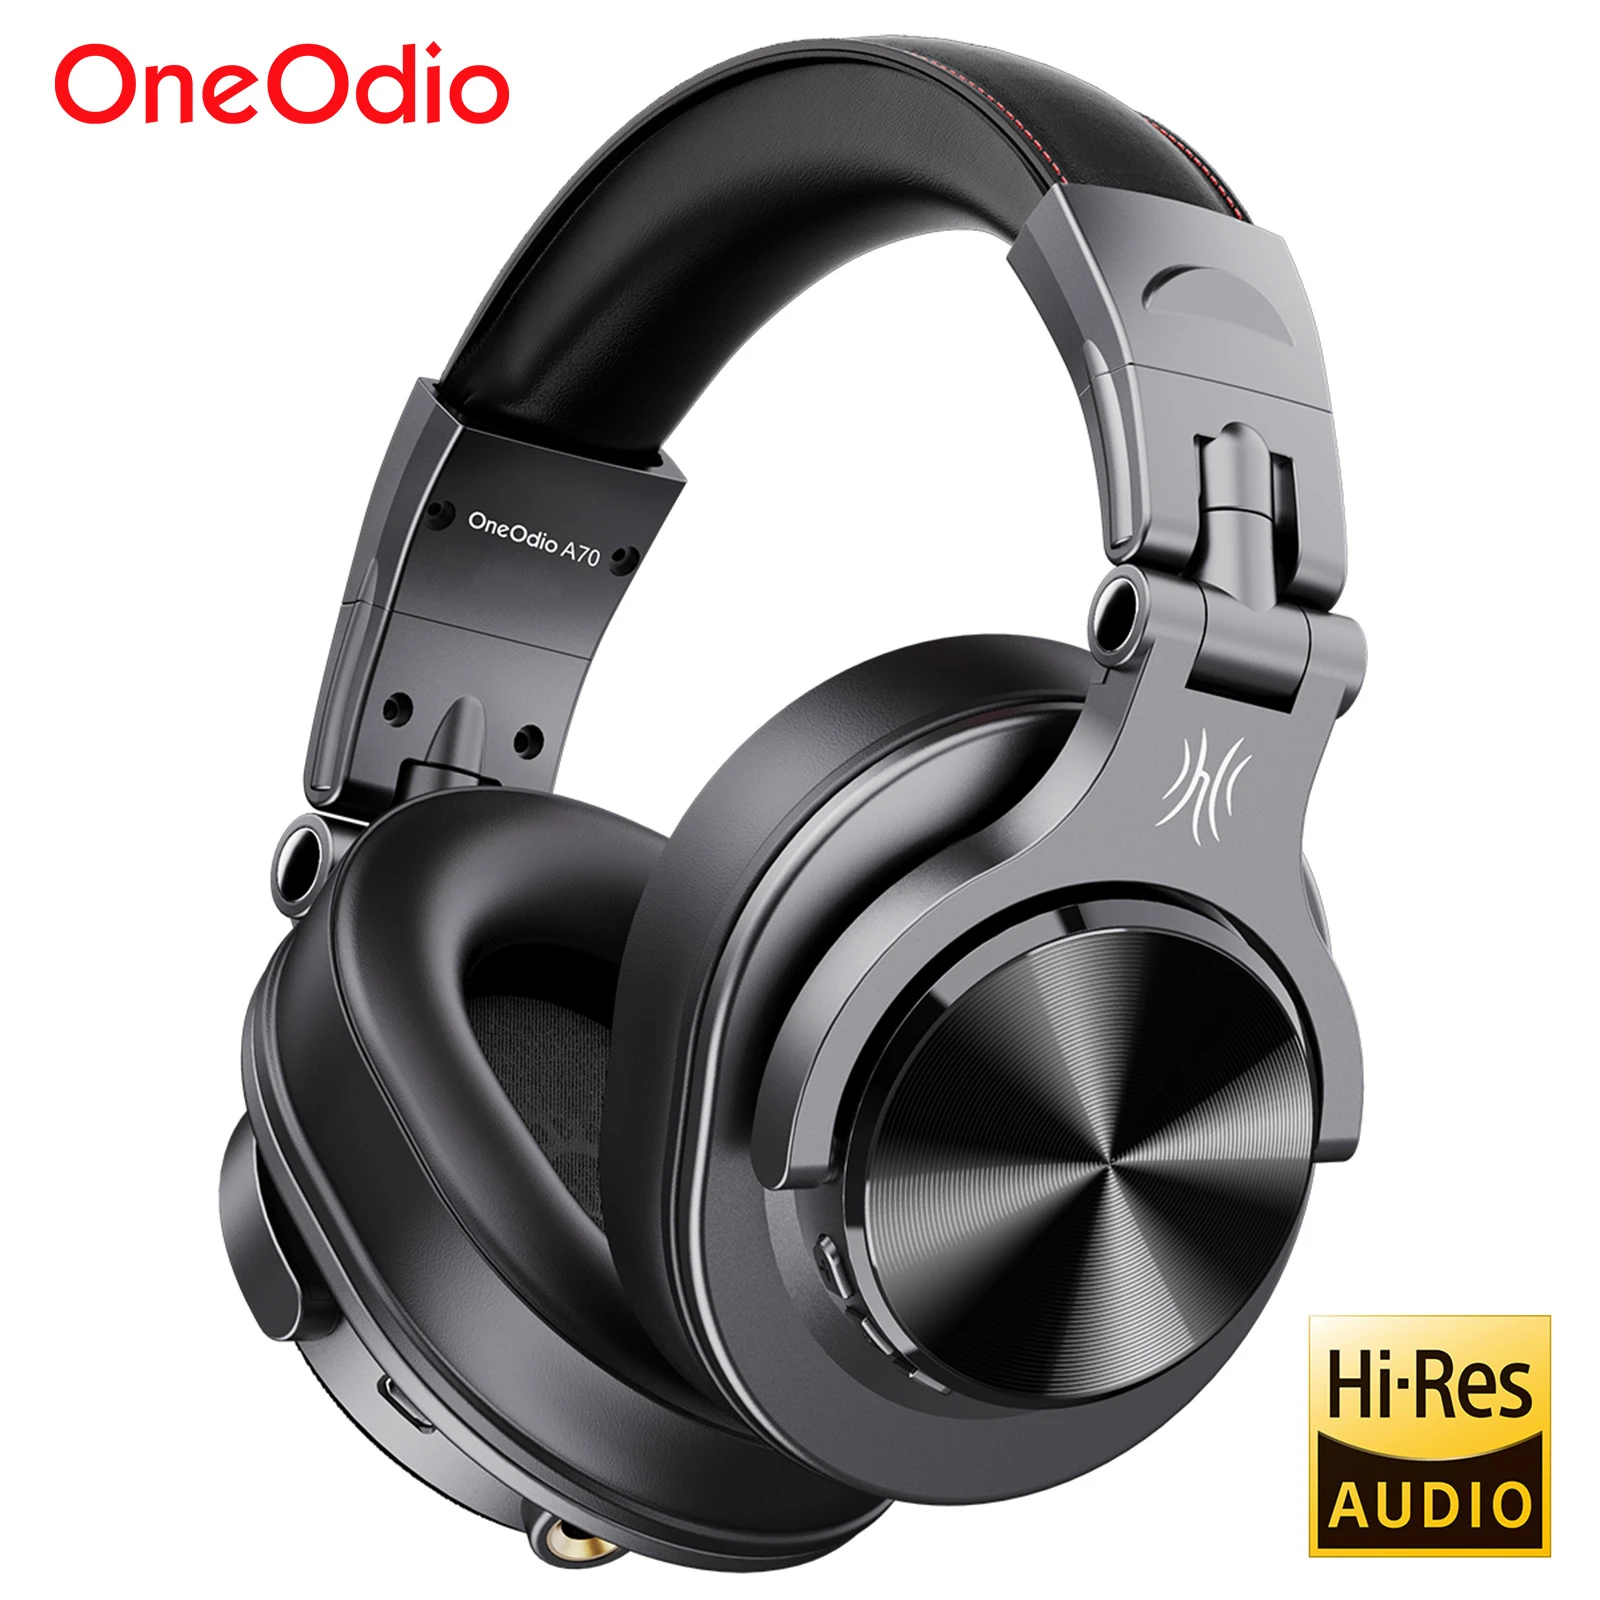 auriculares-bluetooth-Oneodio-Fusion-A70-Hi-Res-Audio-Over-Ear-cascos-inal-mbricos-Bluetooth-5-2.jpg_Q90.jpg_.webp